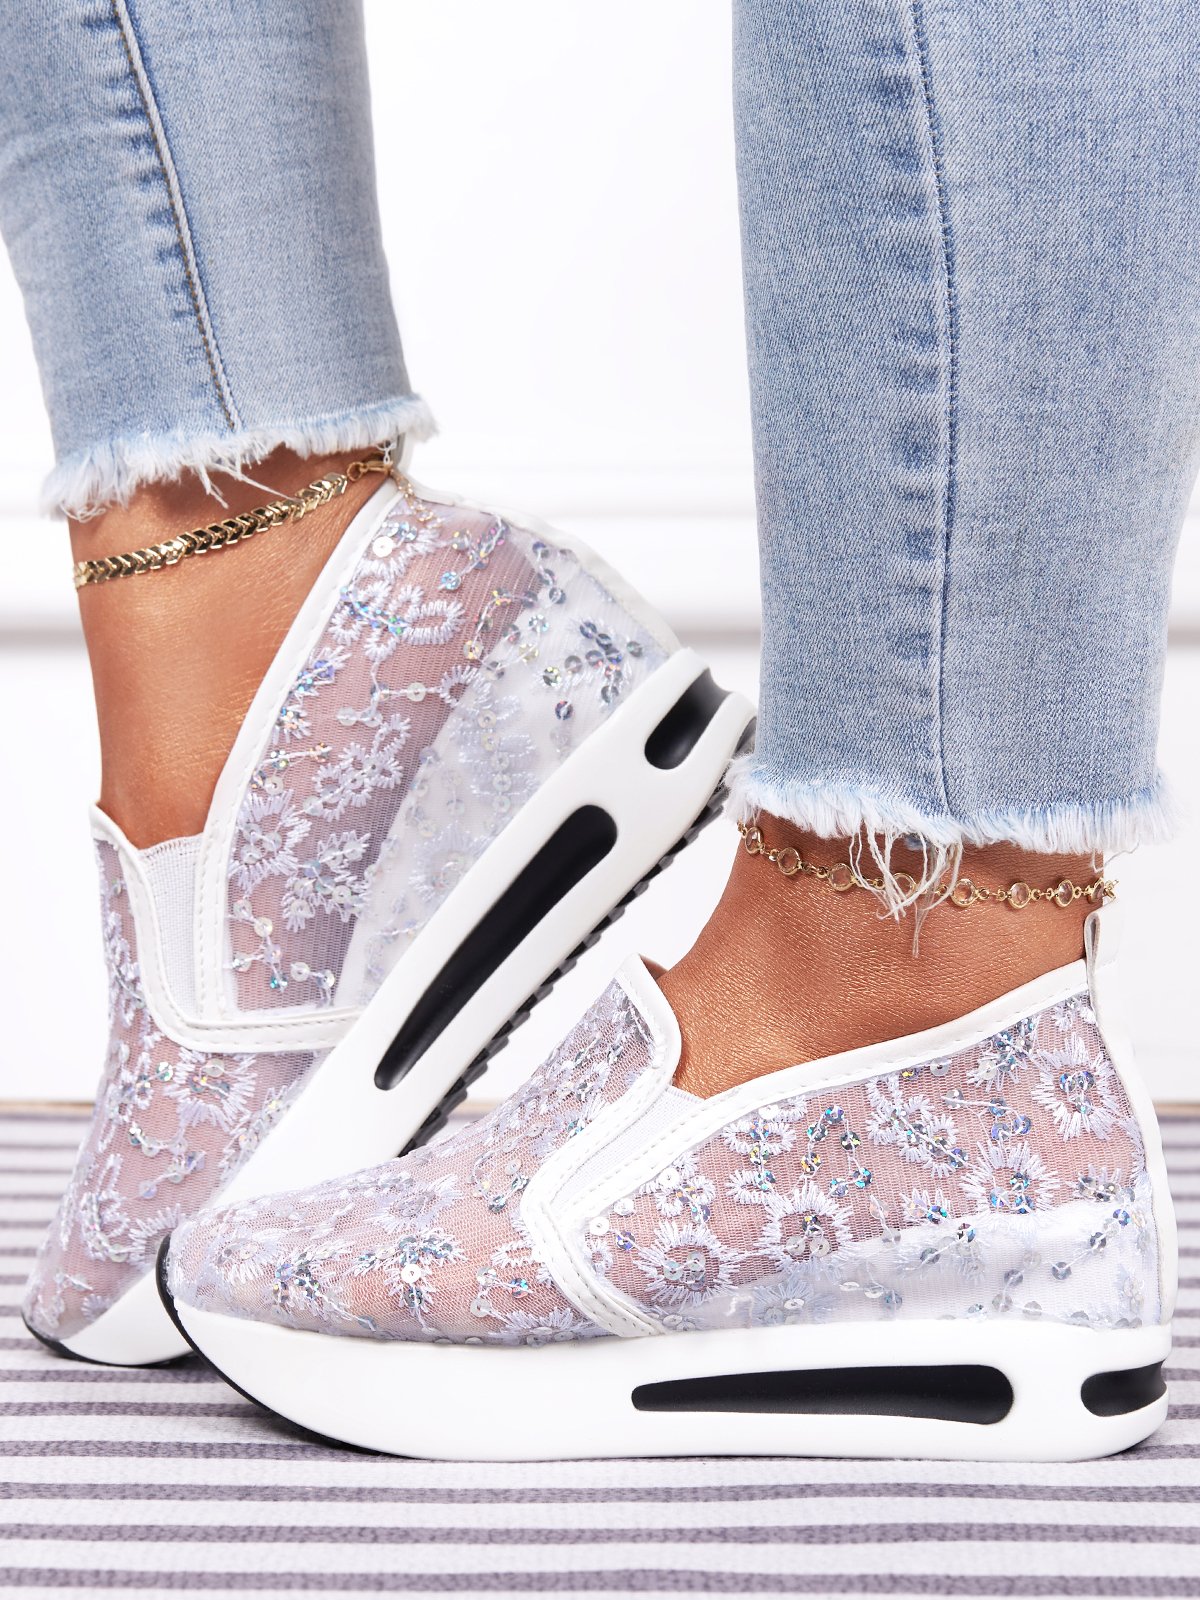 Breathable Floral Embroidery Slip-on Muffin Sneakers | justfashionnow